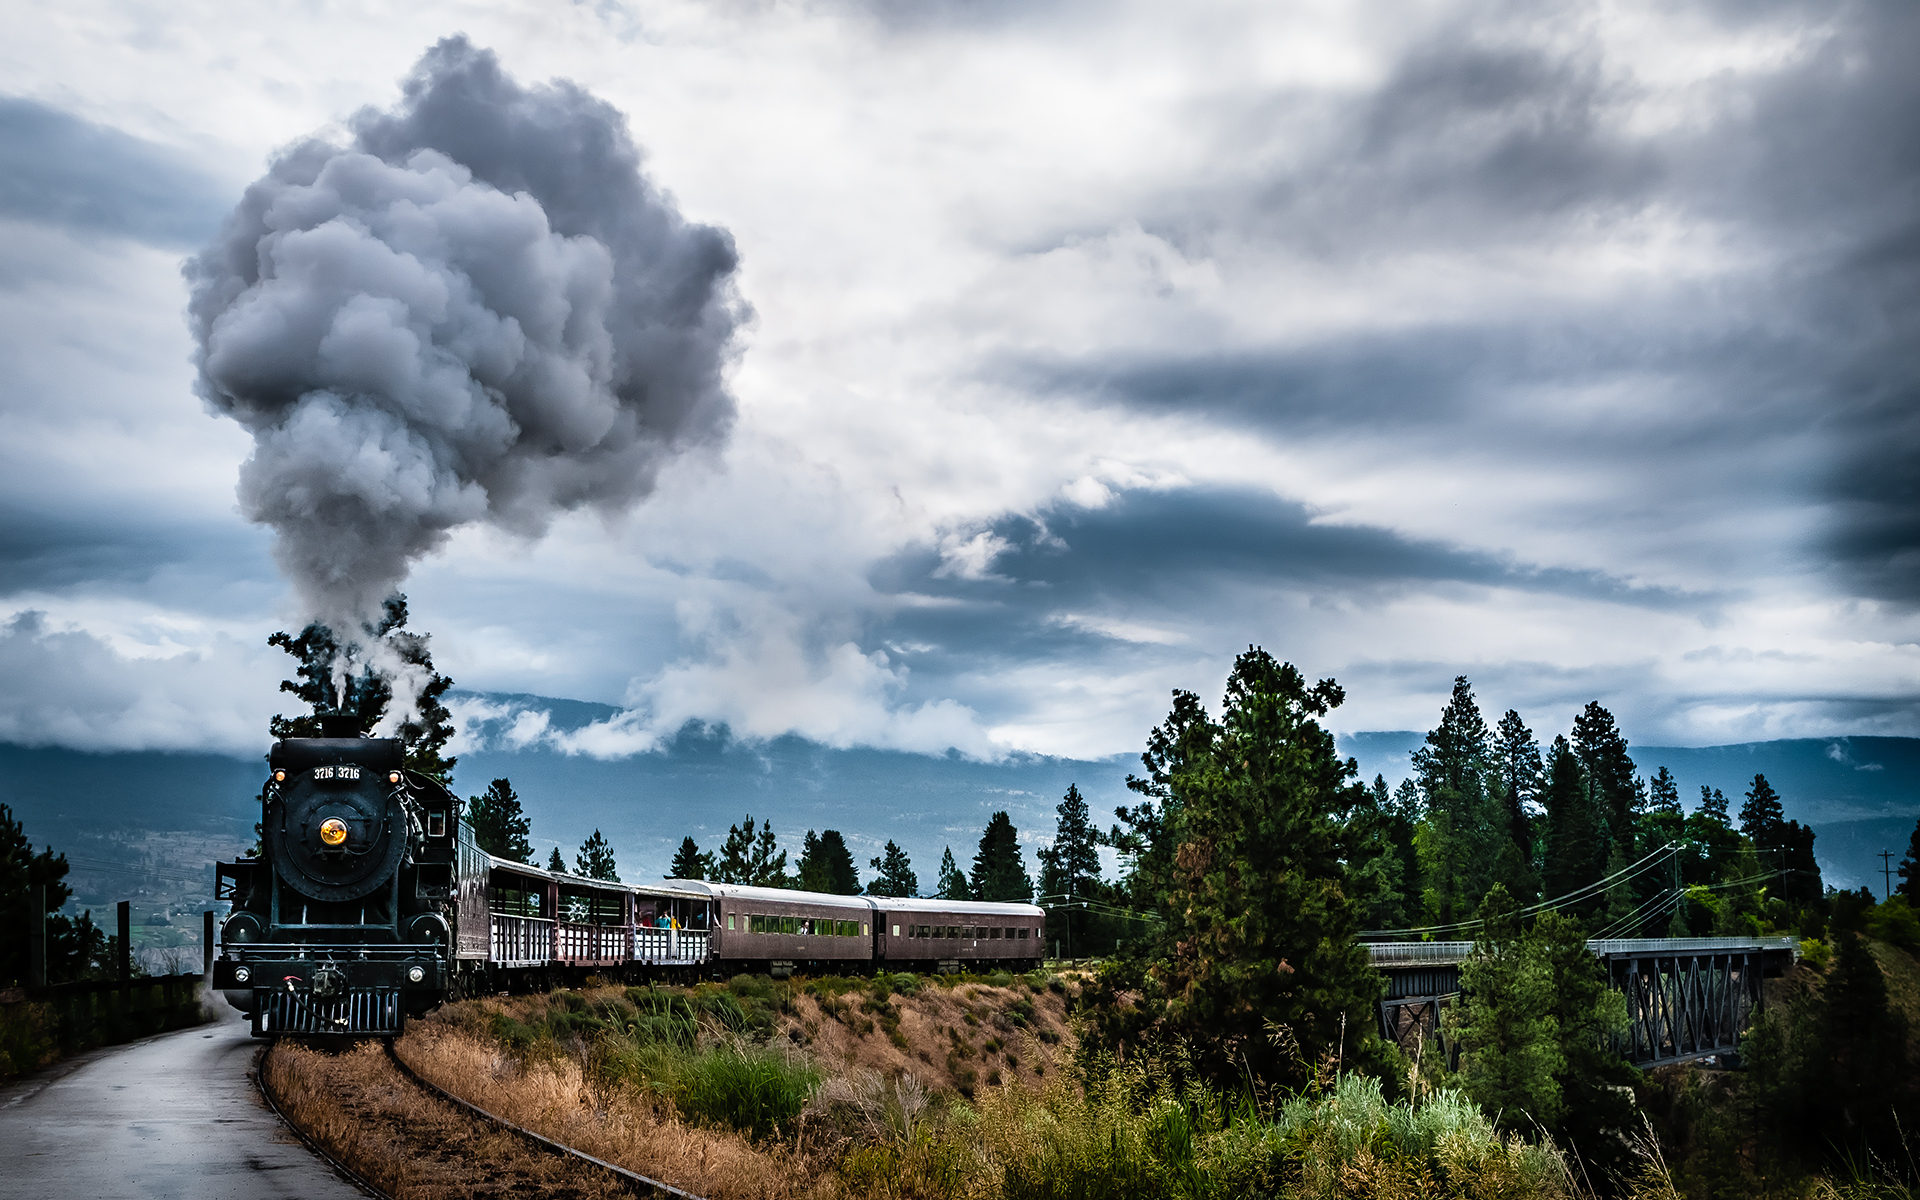 Sky Smoke Train wallpapers and images   wallpapers pictures photos 1920x1200